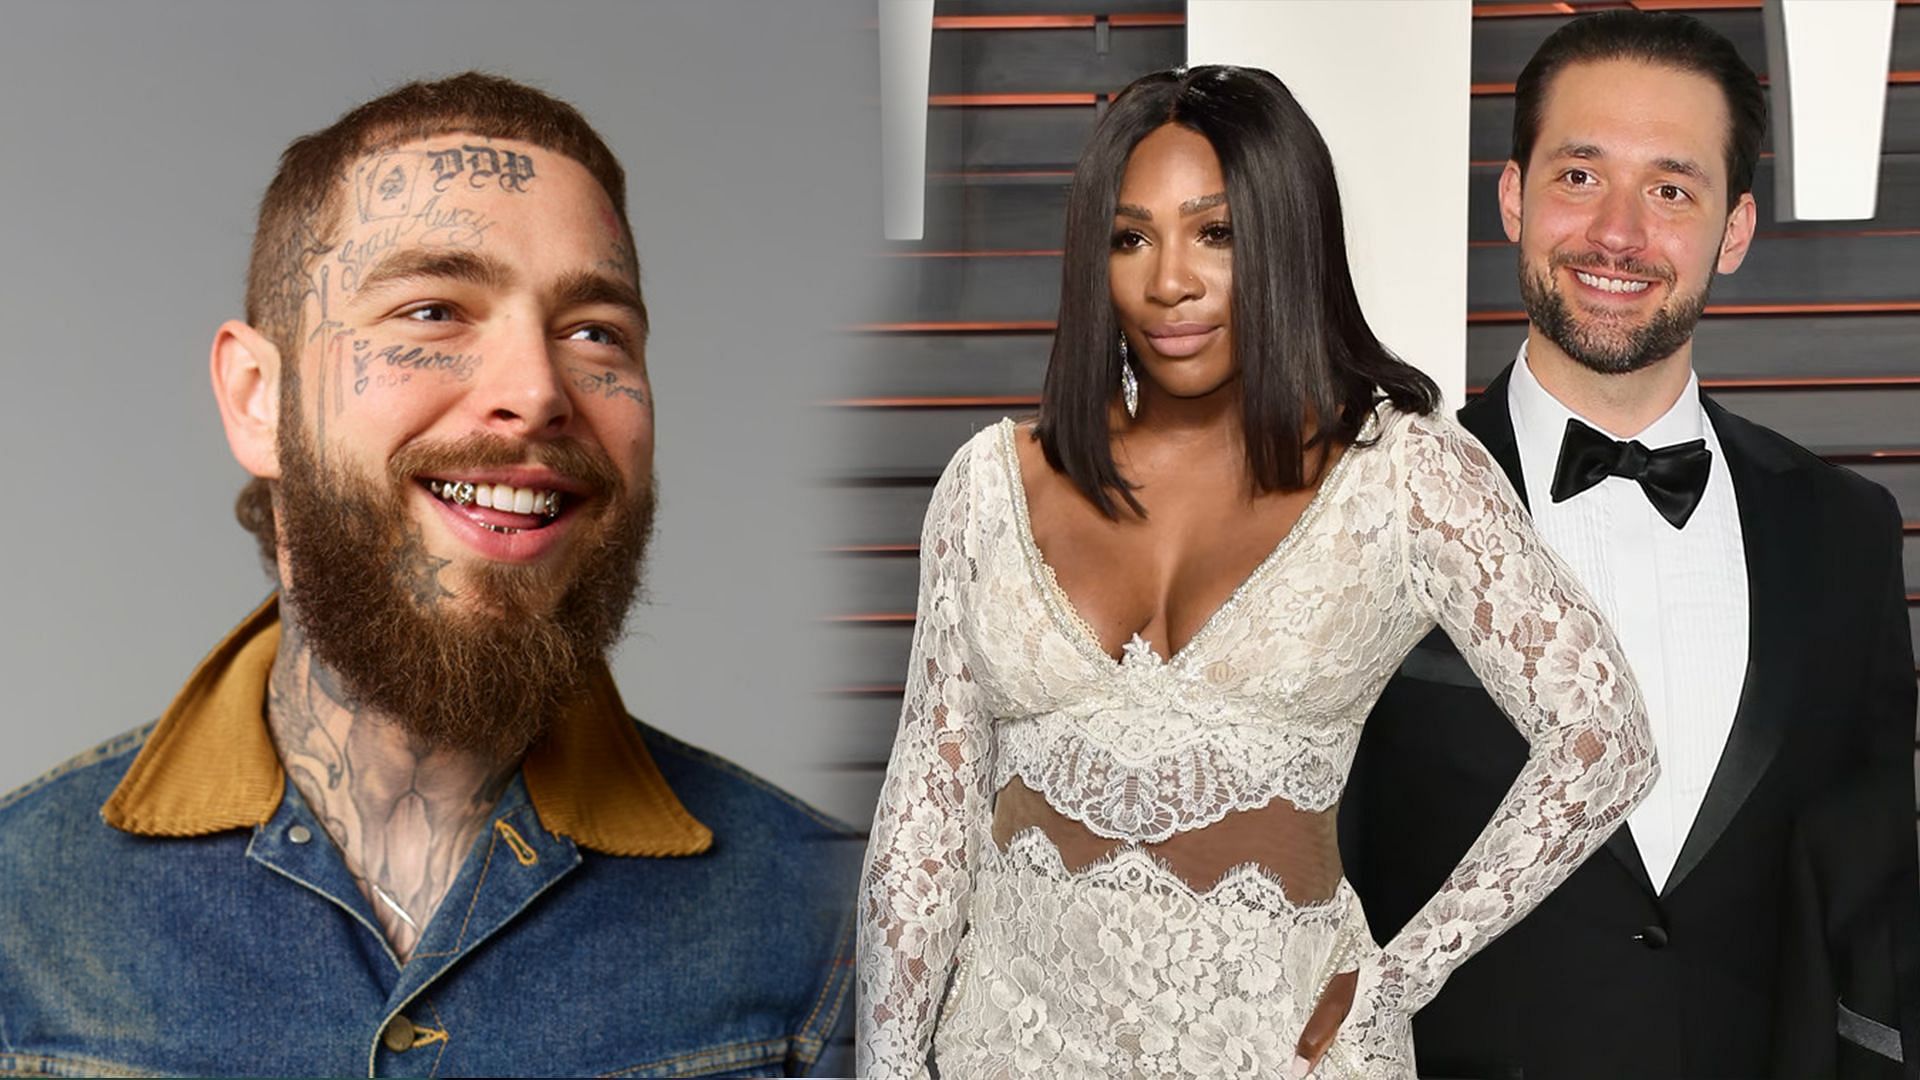 Post Malone (L) and Serena Williams along with her husband Alexis Ohanian (R)